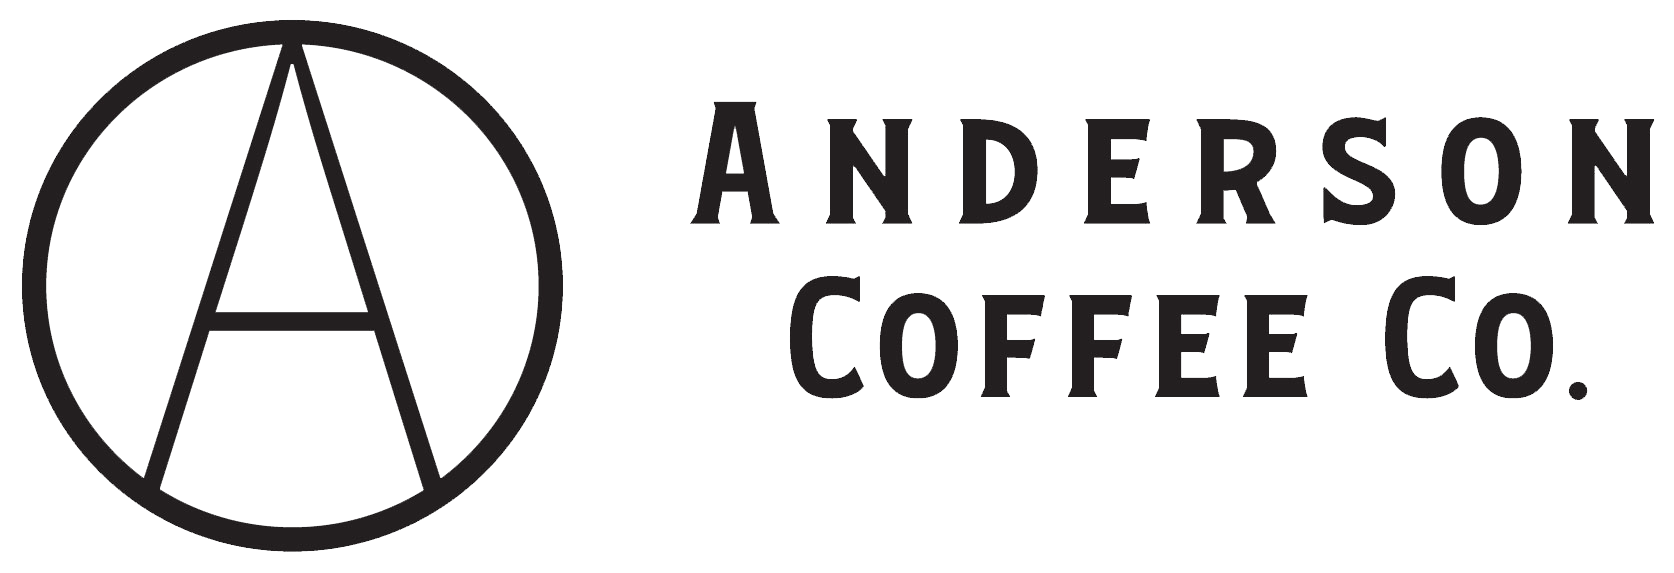 Logo - Anderson Coffee Co. Specialty Coffee Brand